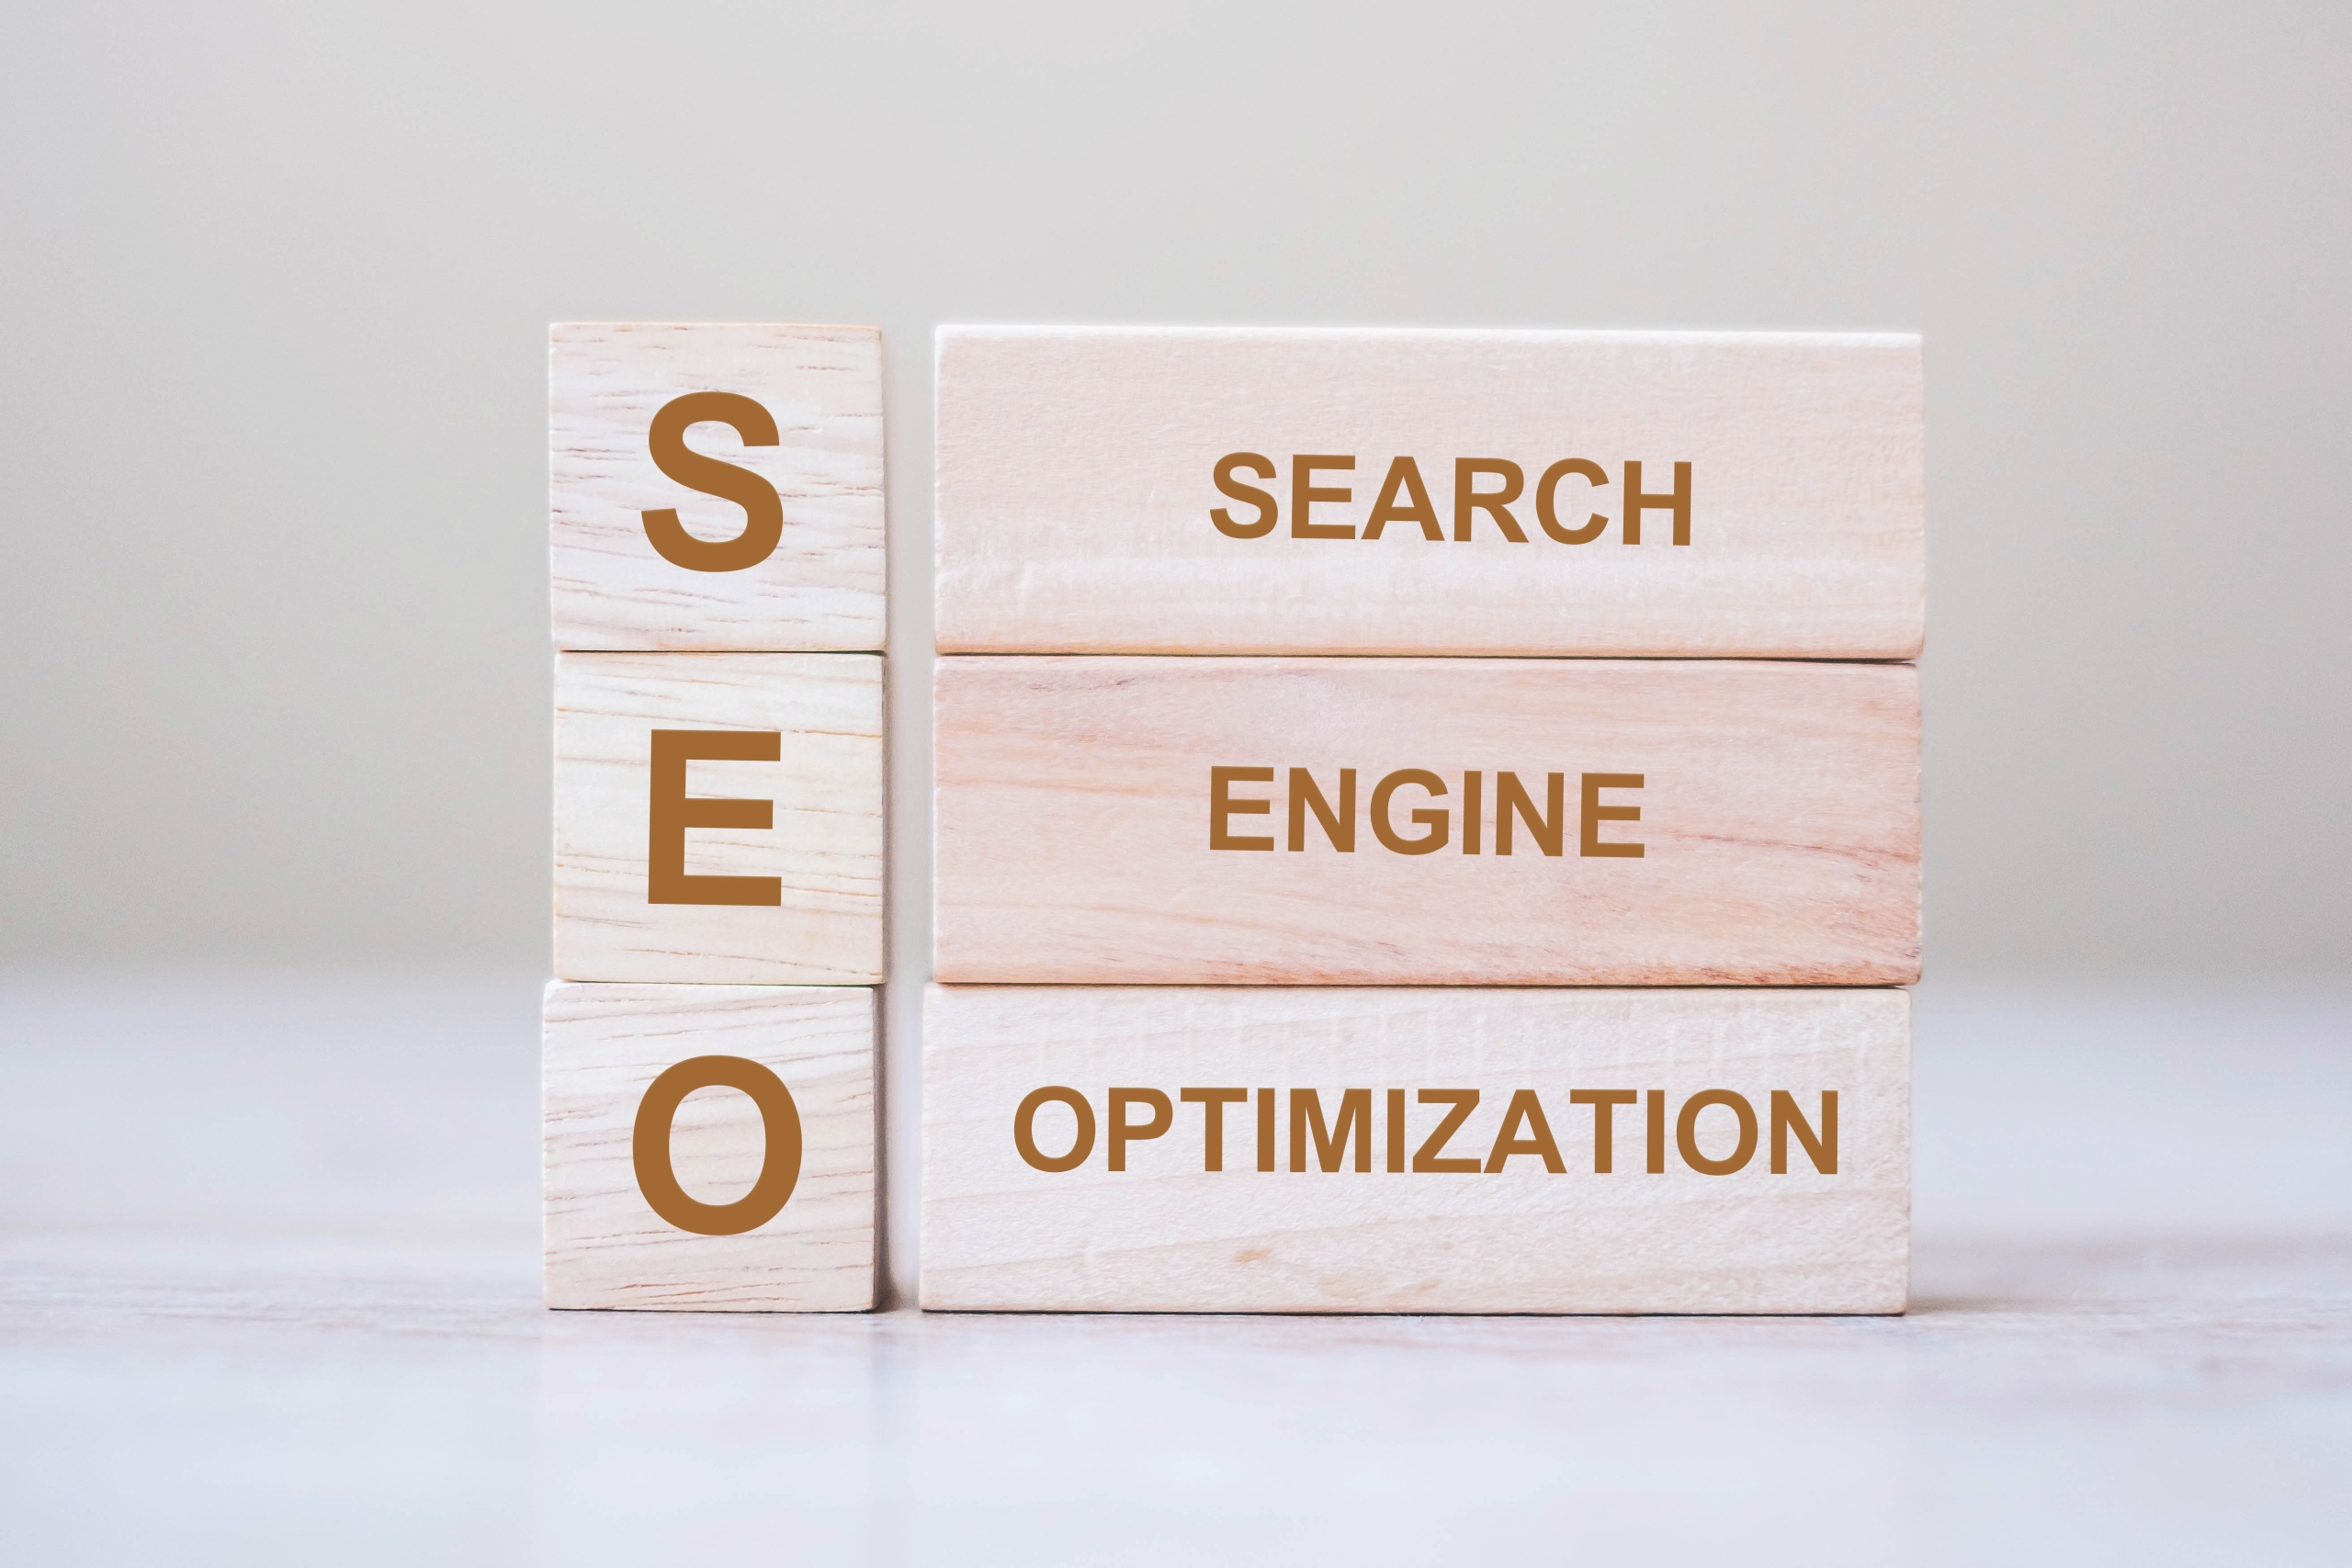 StrategyDriven Online Marketing and Website Development Article, The Dynamic Impact of French SEO and Copywriting on Your Business